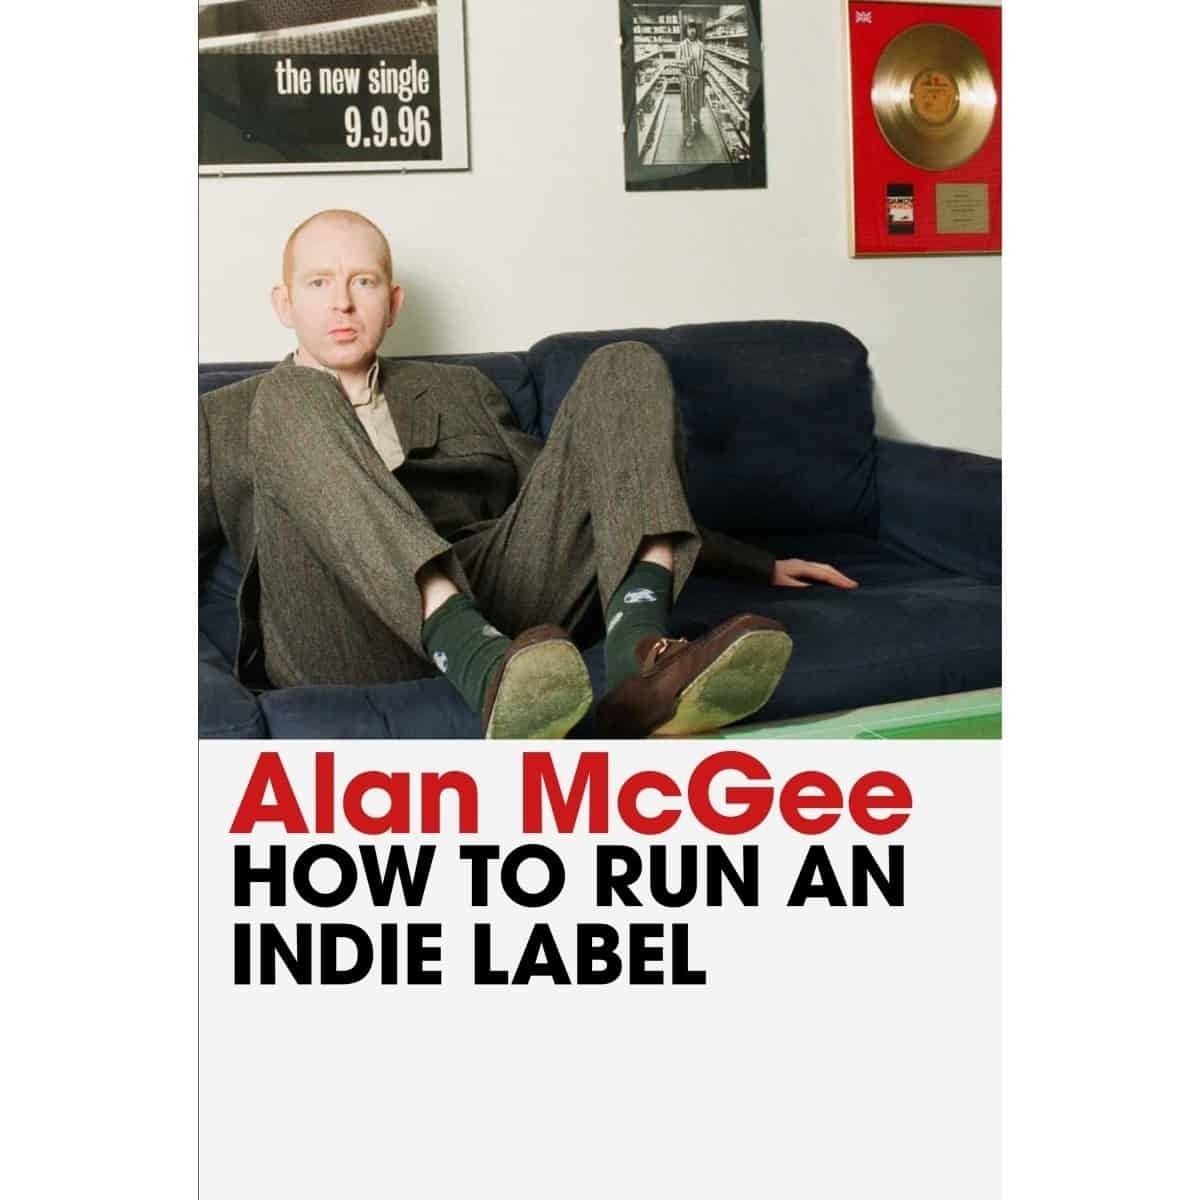 Atlantic Books (SIGNED) Alan McGee - How to Run an Indie Label